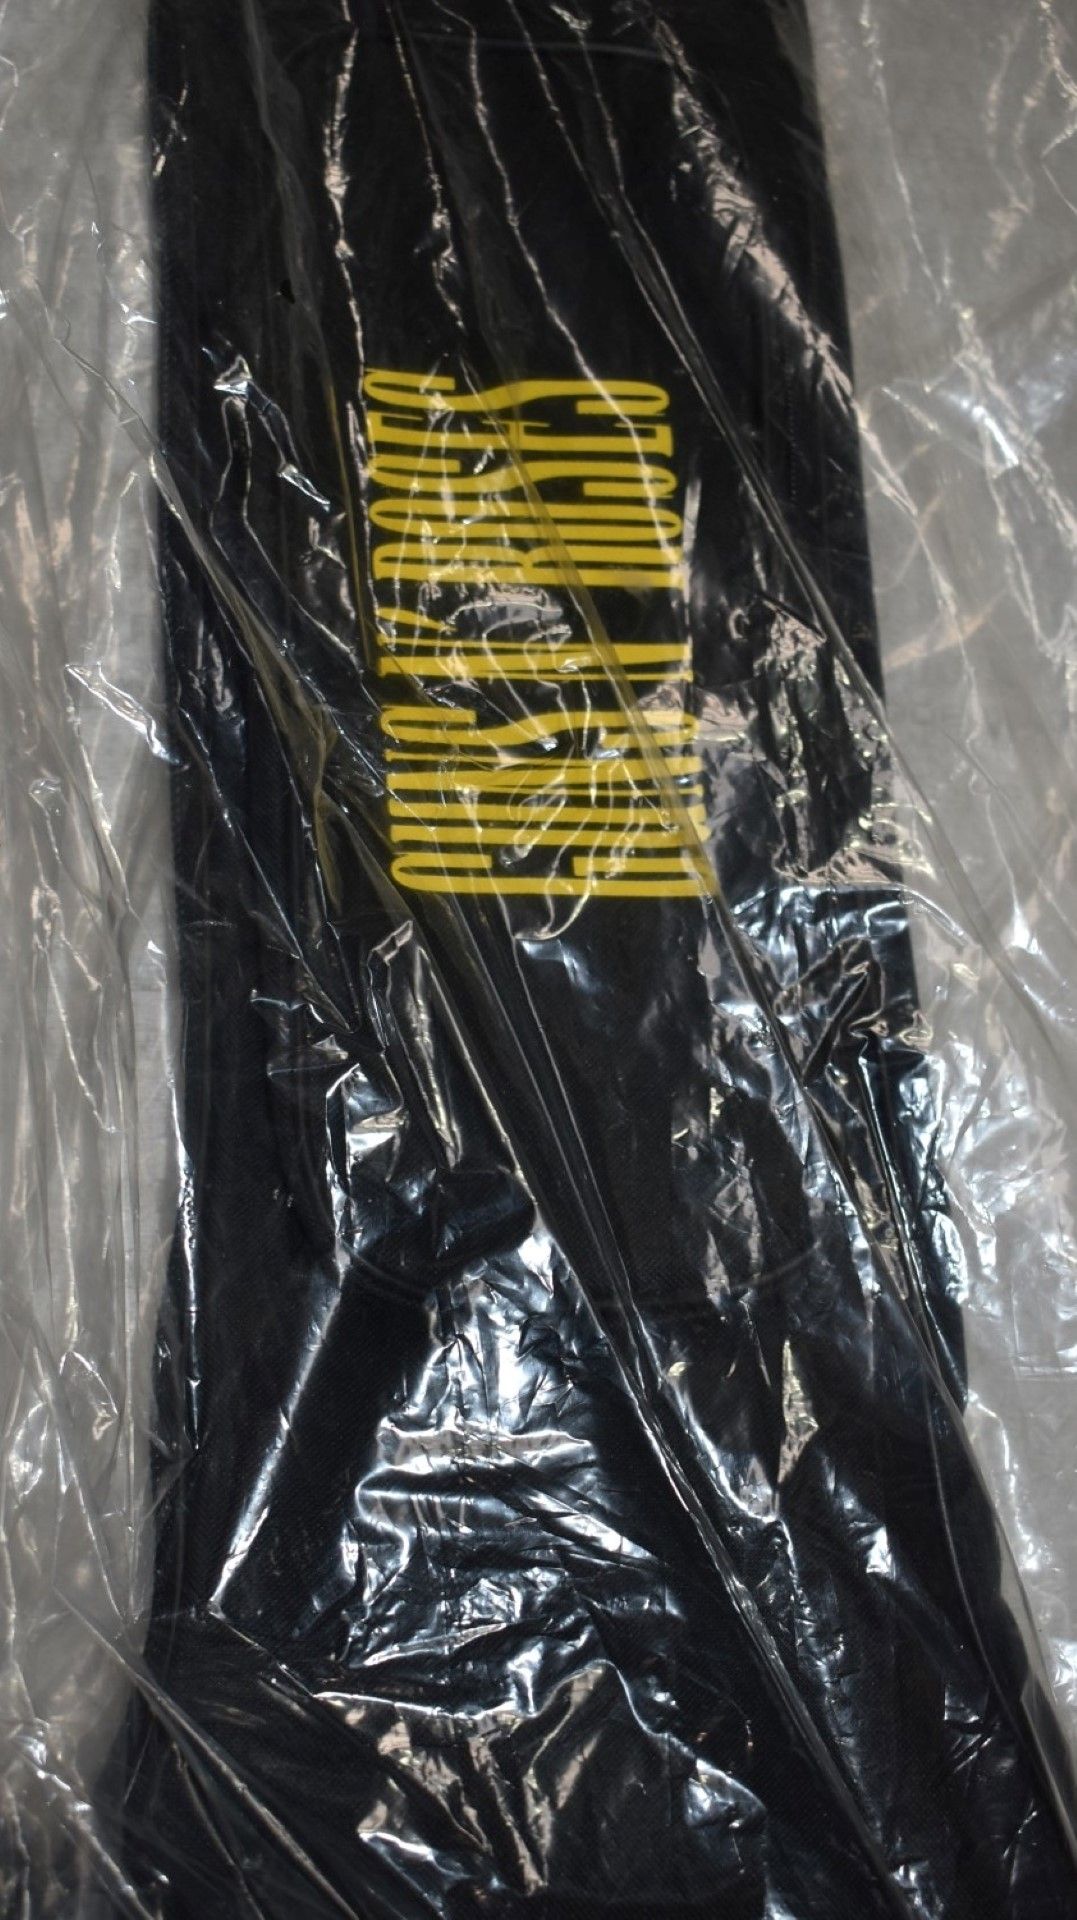 1 x Guns N Roses Electric Guitar Gig Bag By Perris - Officially Licensed Merchandise - New & Unused - Image 5 of 7